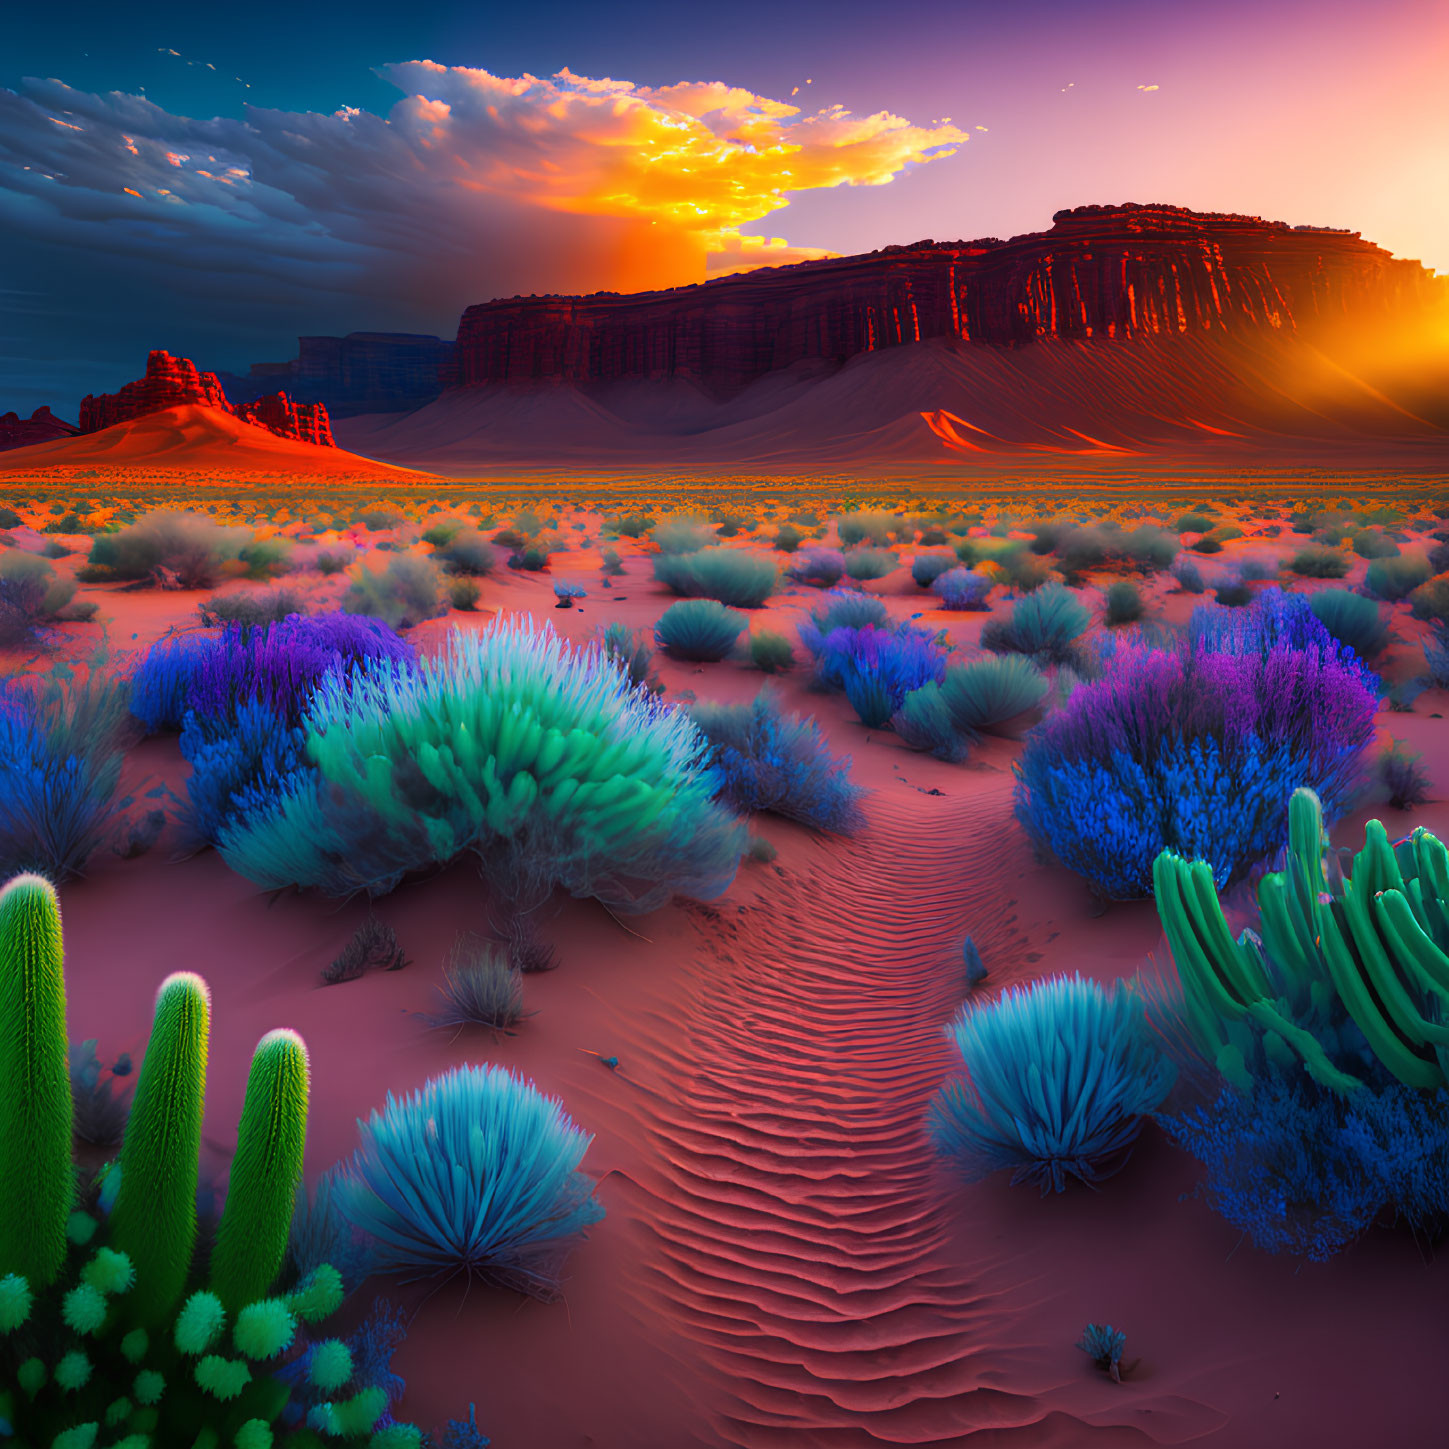 Colorful Flora and Red Sand Dunes in Vibrant Desert Sunset